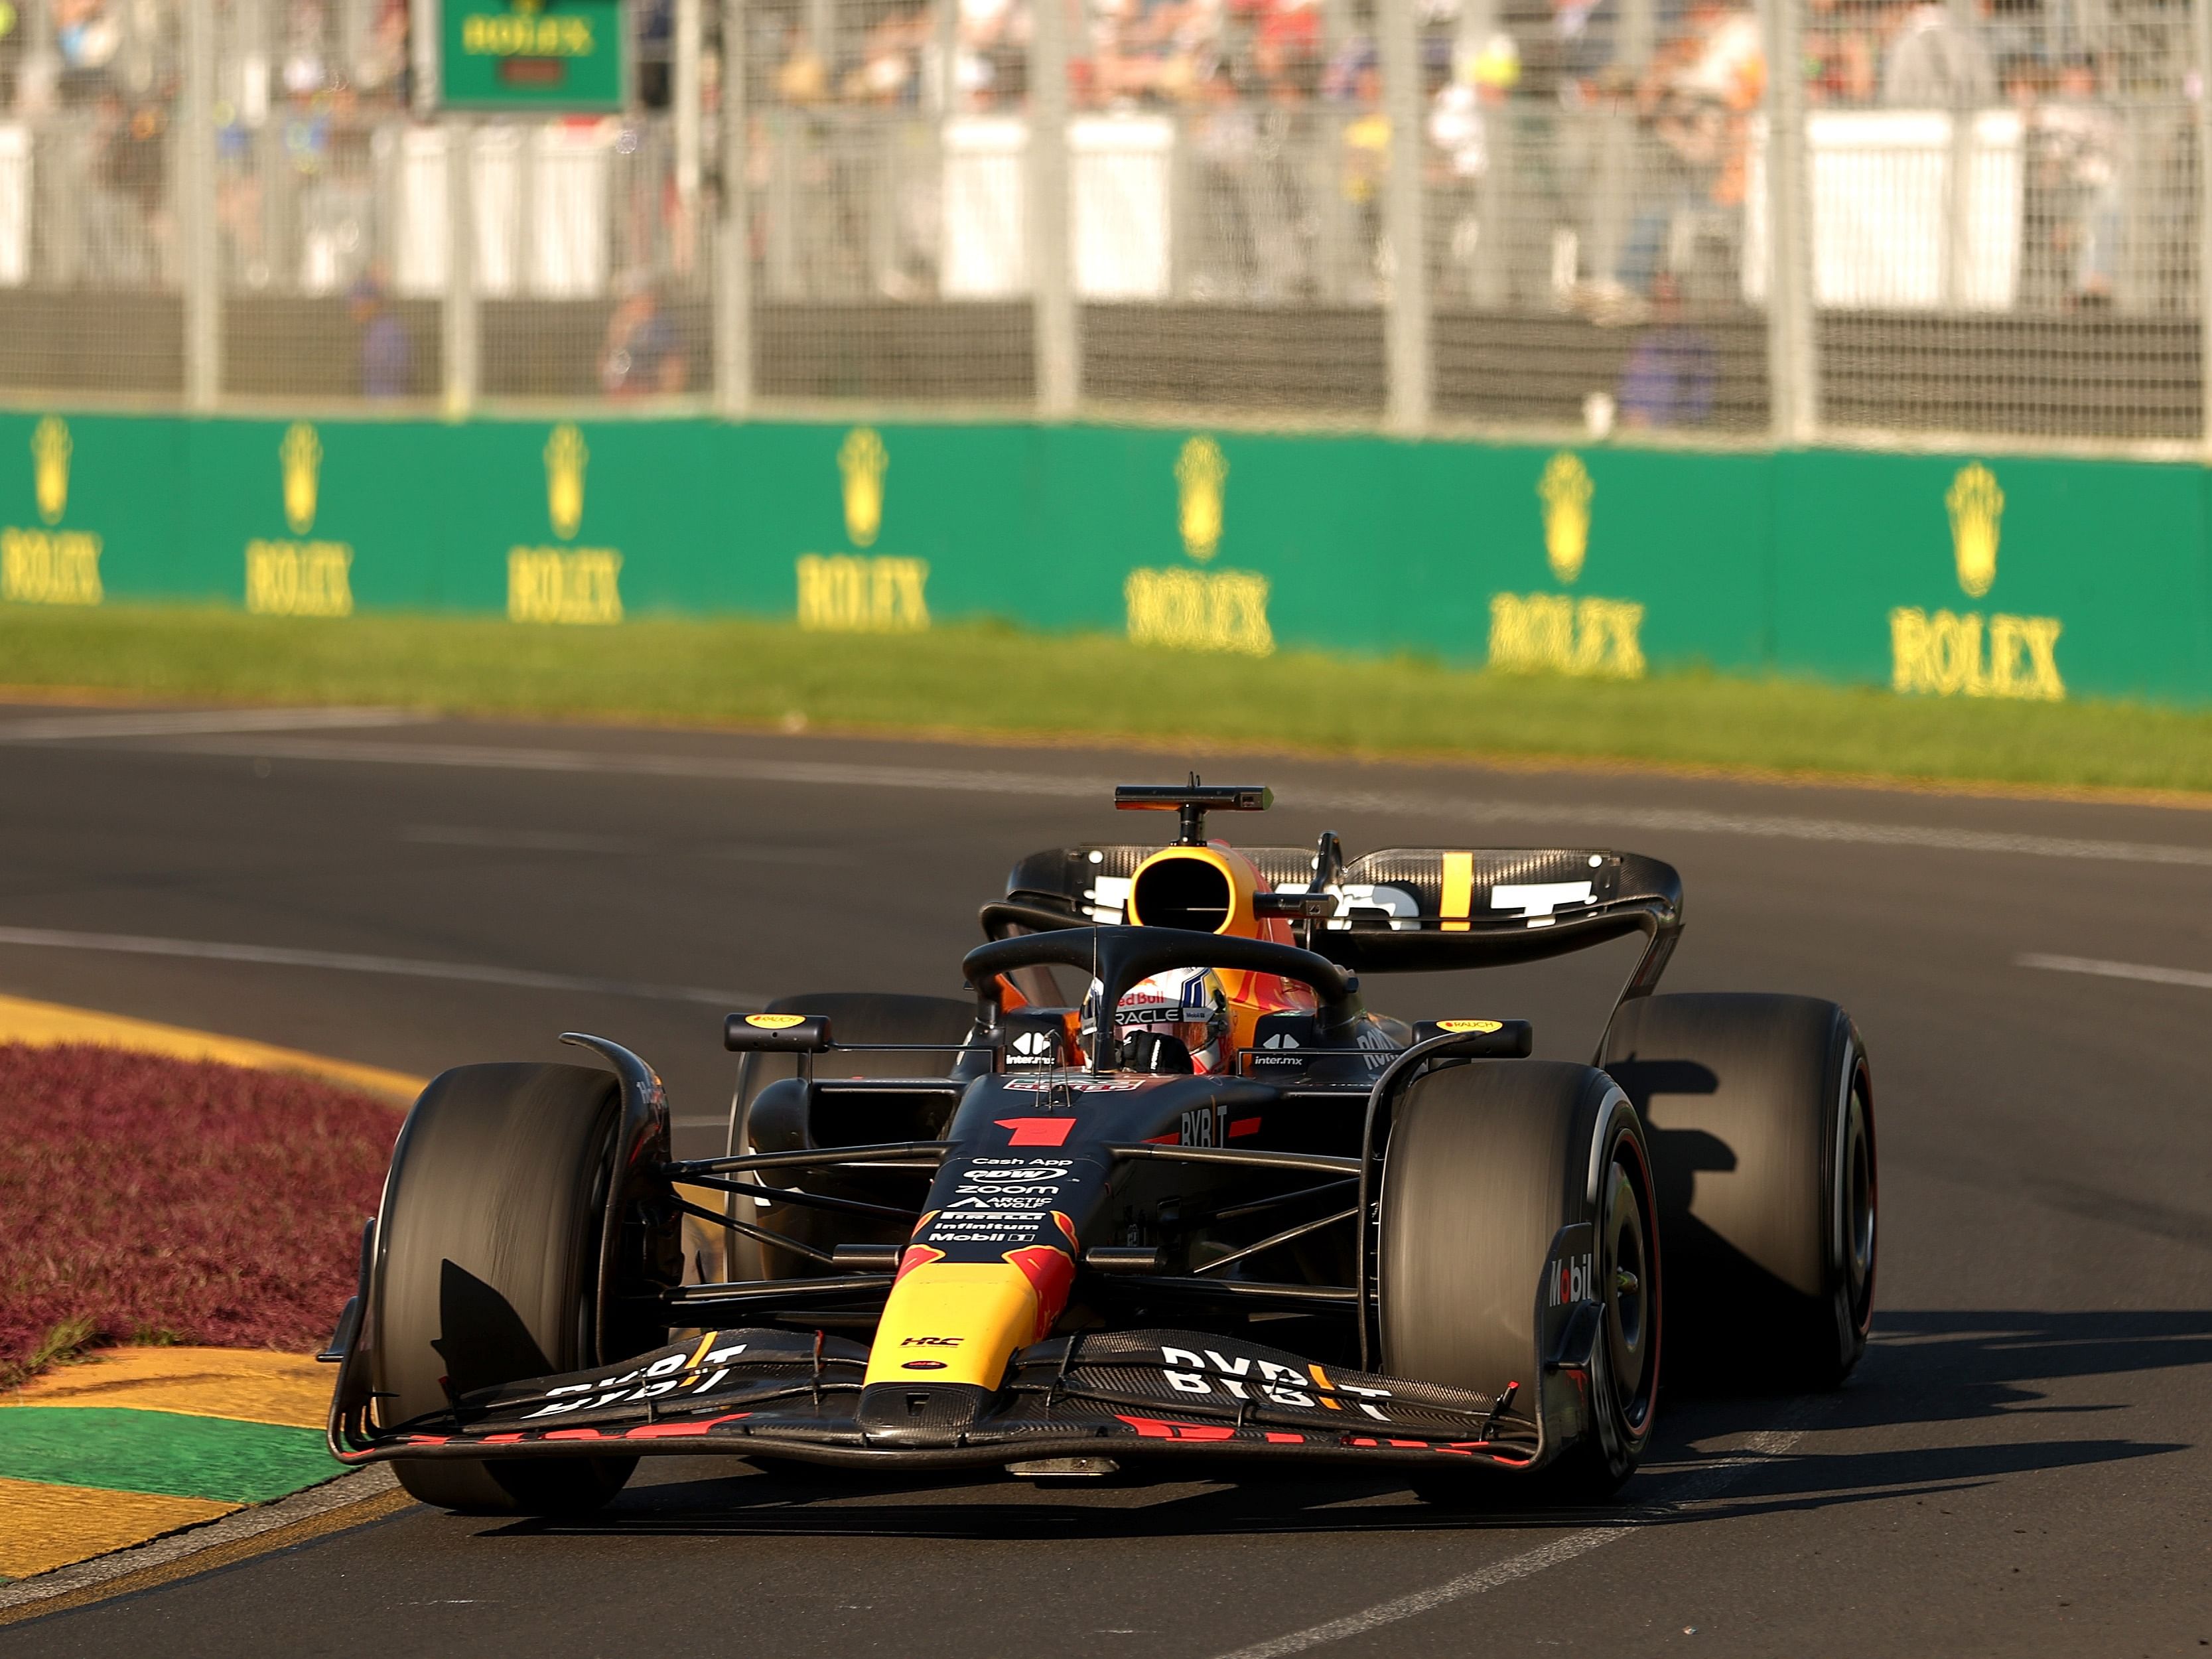 Max Verstappen (1) on track during the 2023 F1 Australian Grand Prix (Photo by Robert Cianflone/Getty Images)